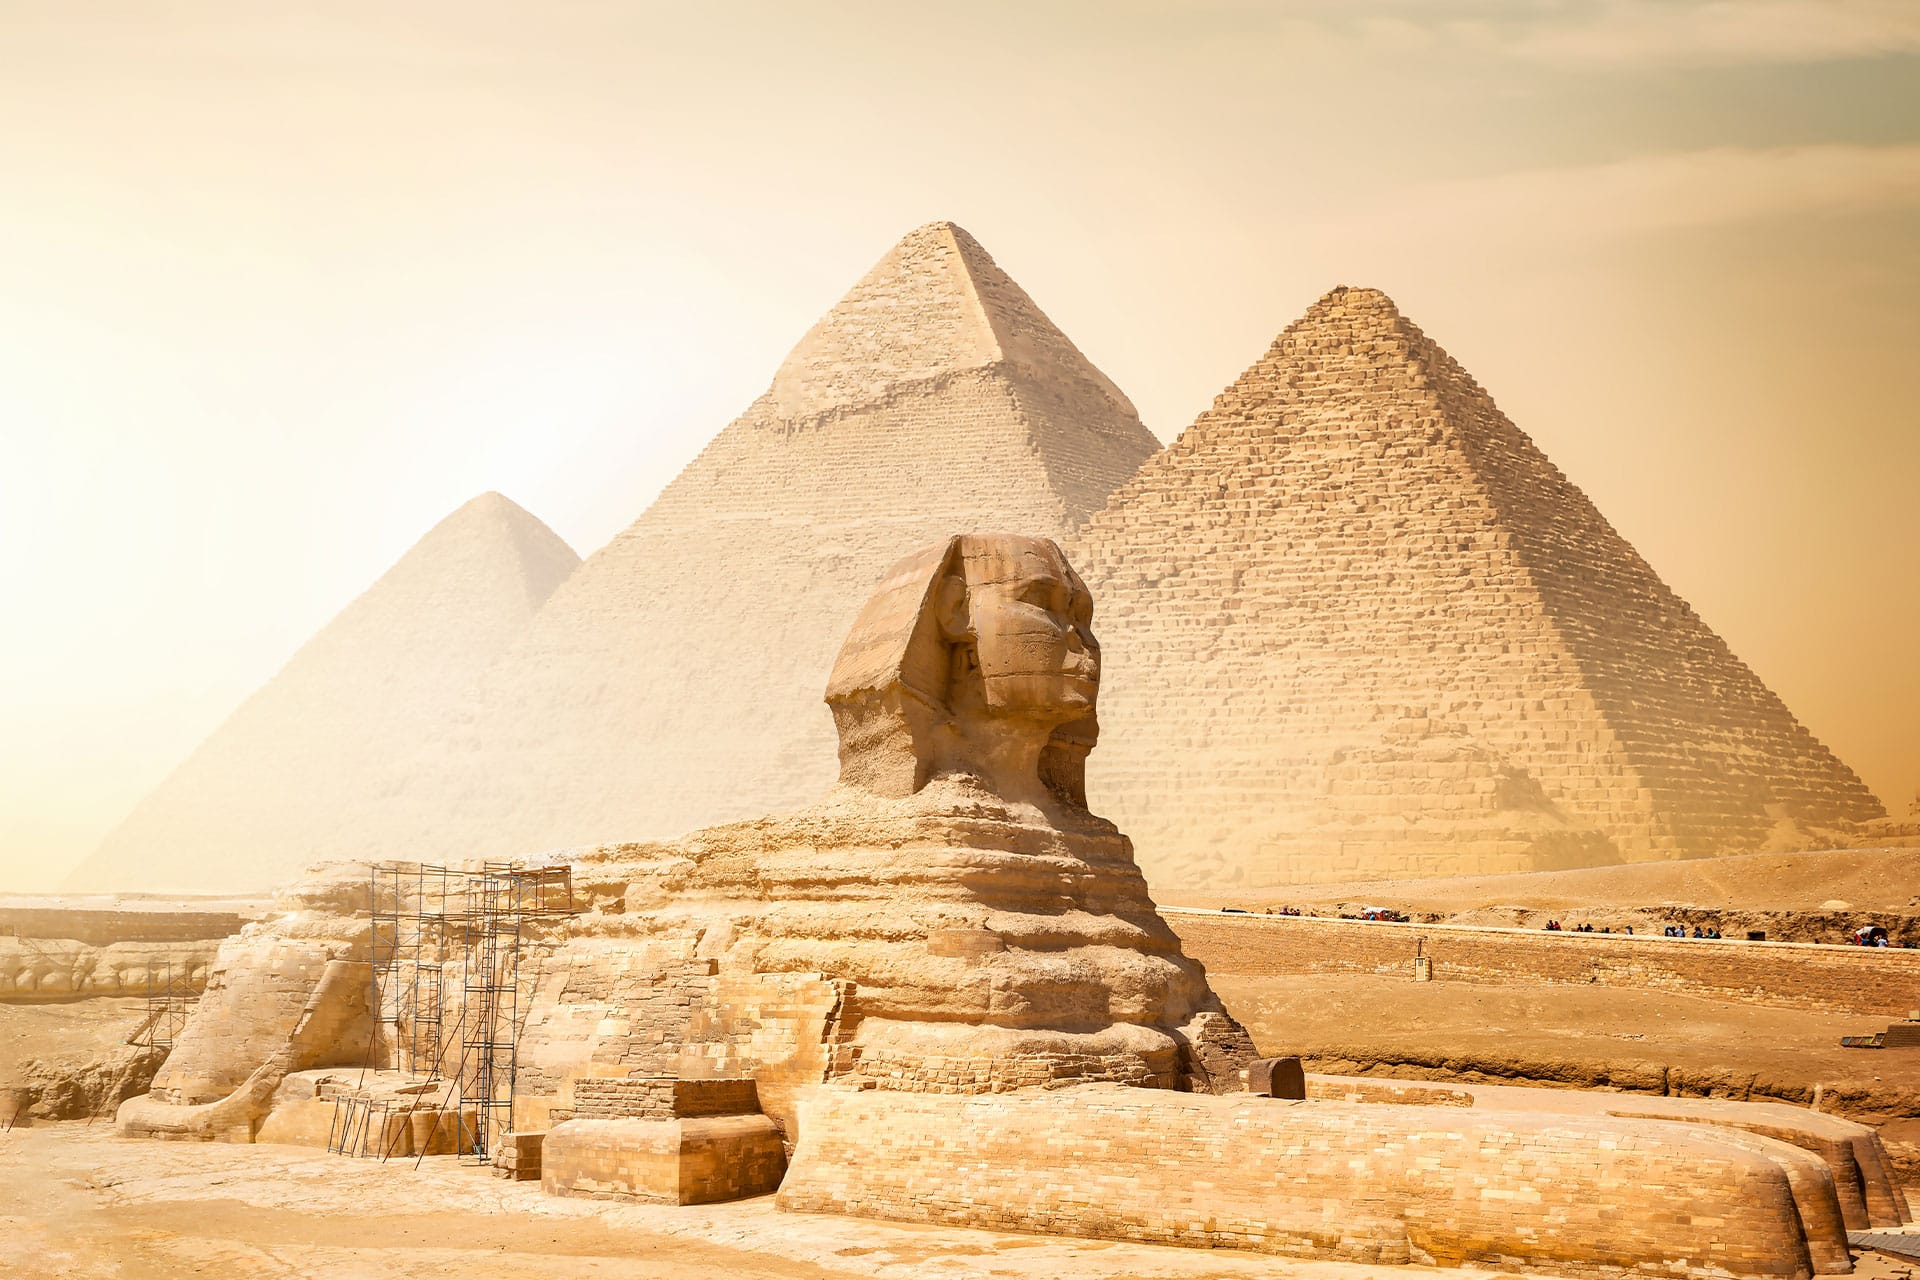 The Great Sphinx of Giza – one of the top attractions in Egypt.